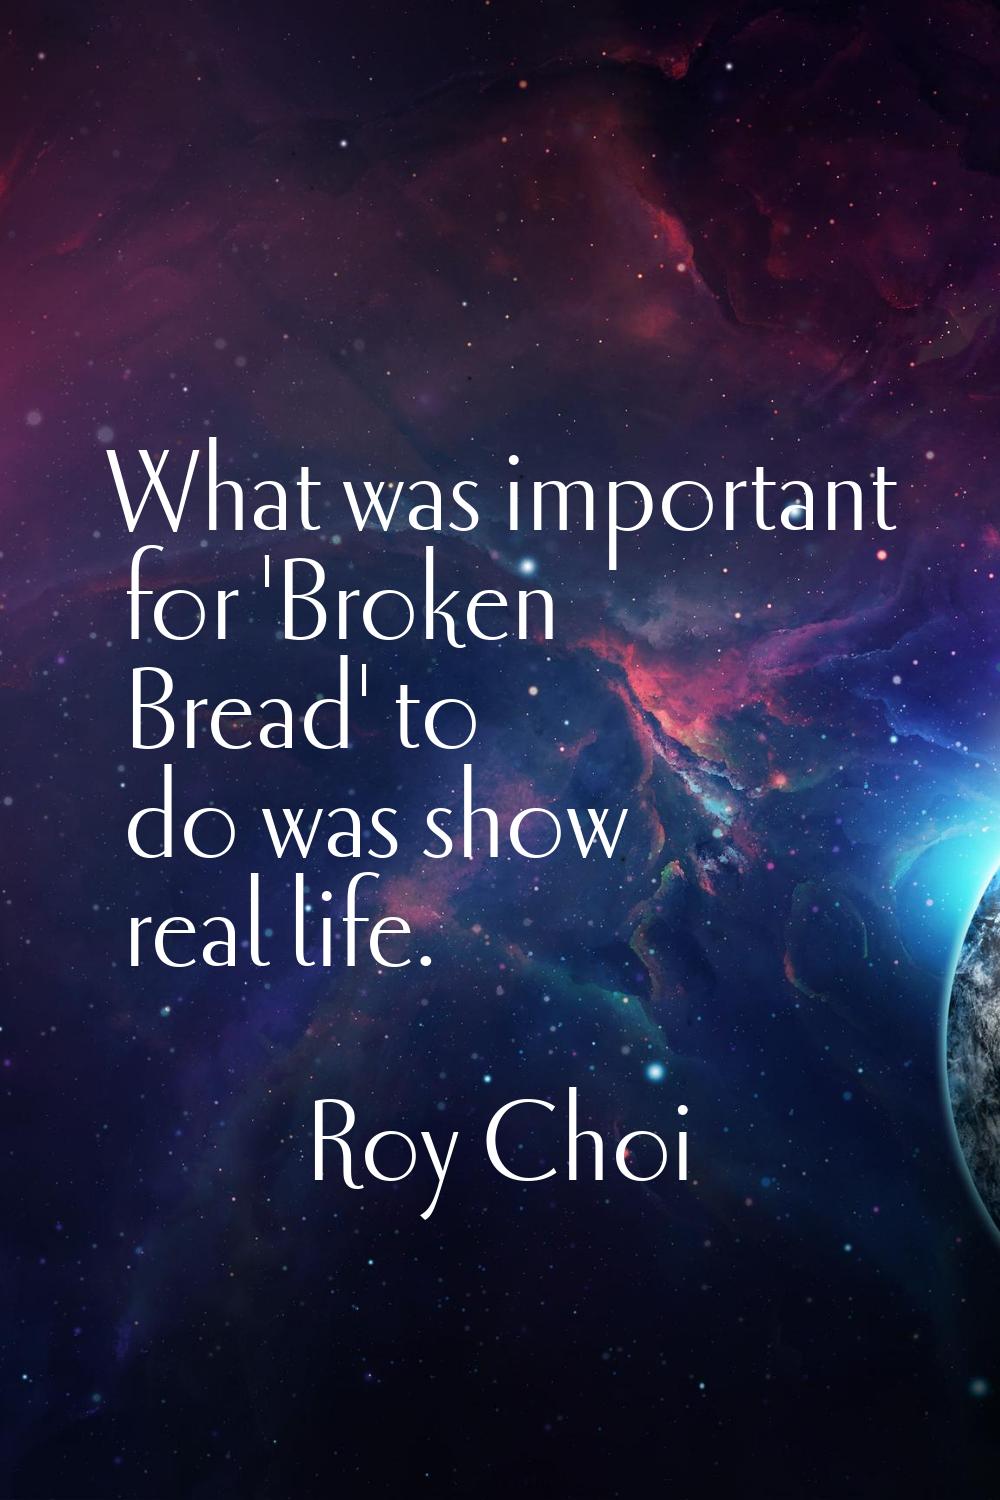 What was important for 'Broken Bread' to do was show real life.